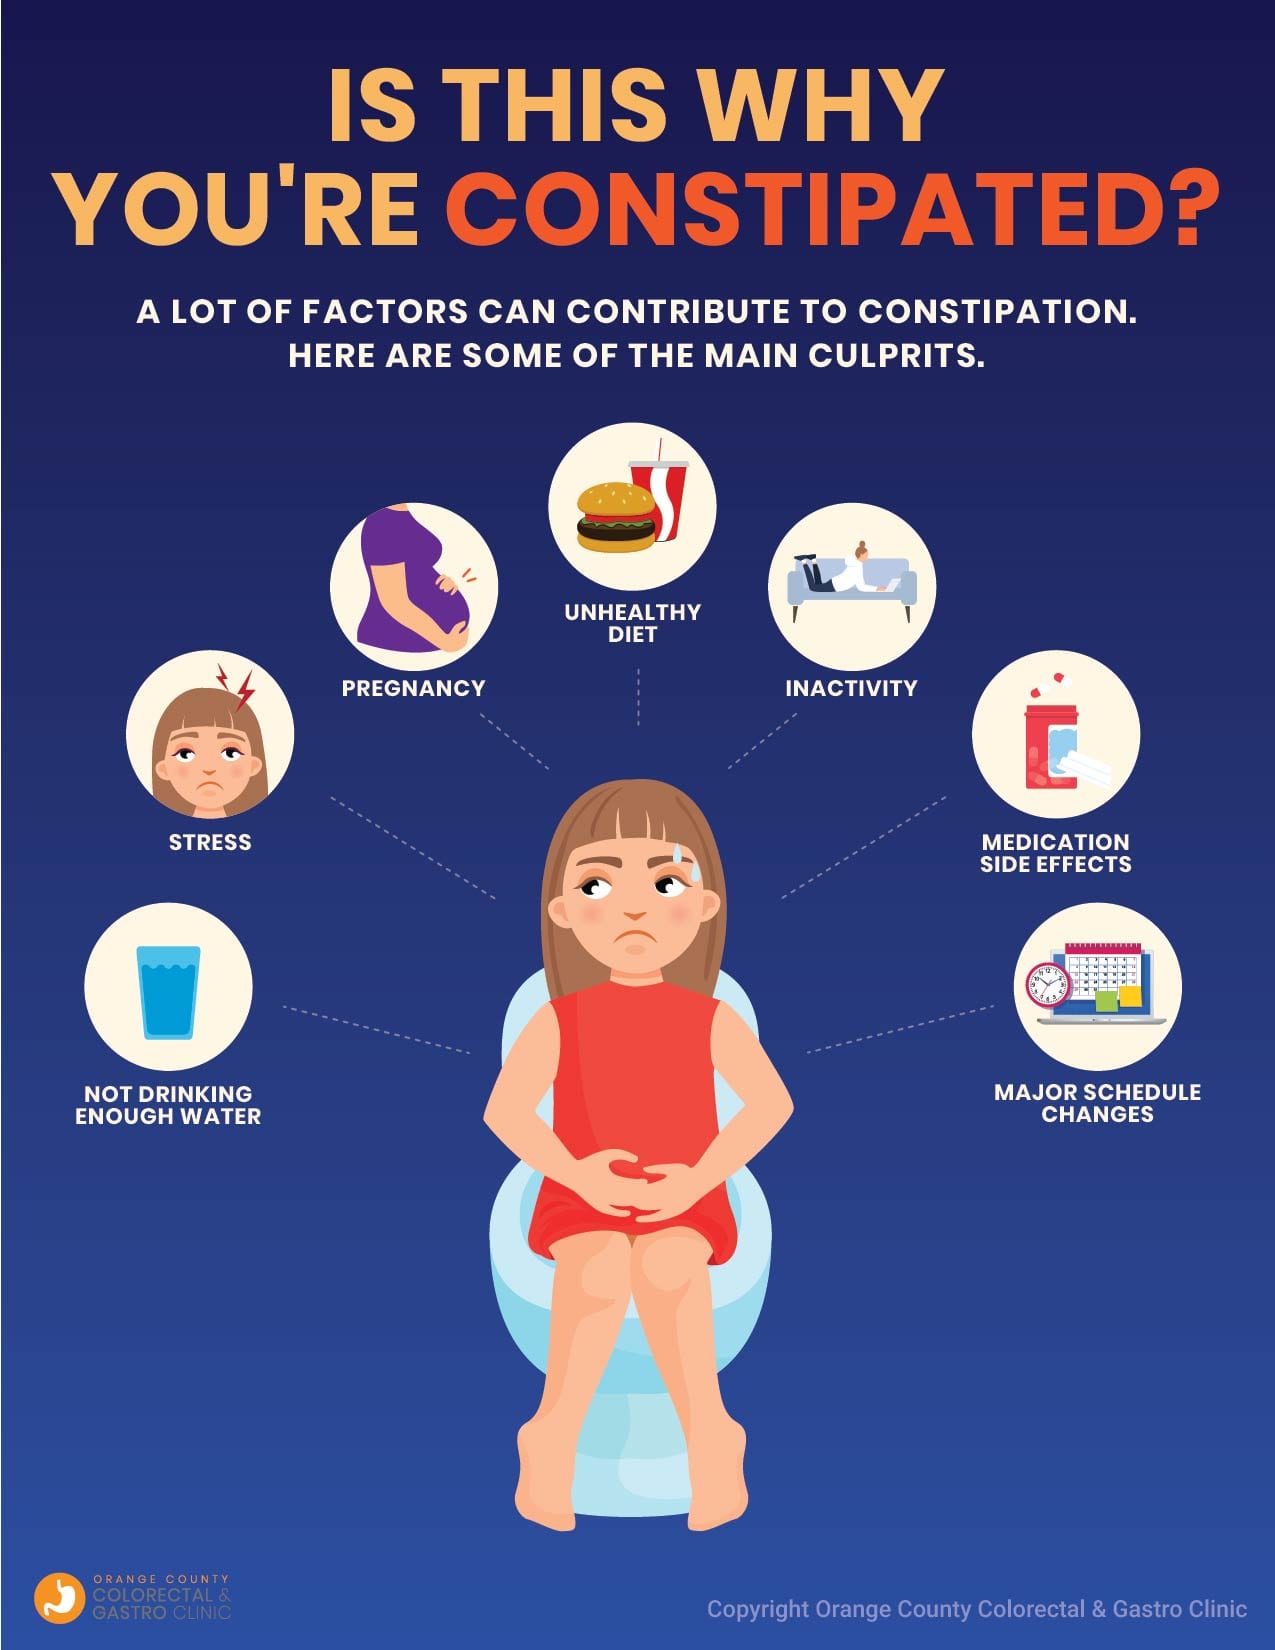 8 causes of constipation - an infographic showing risk factors